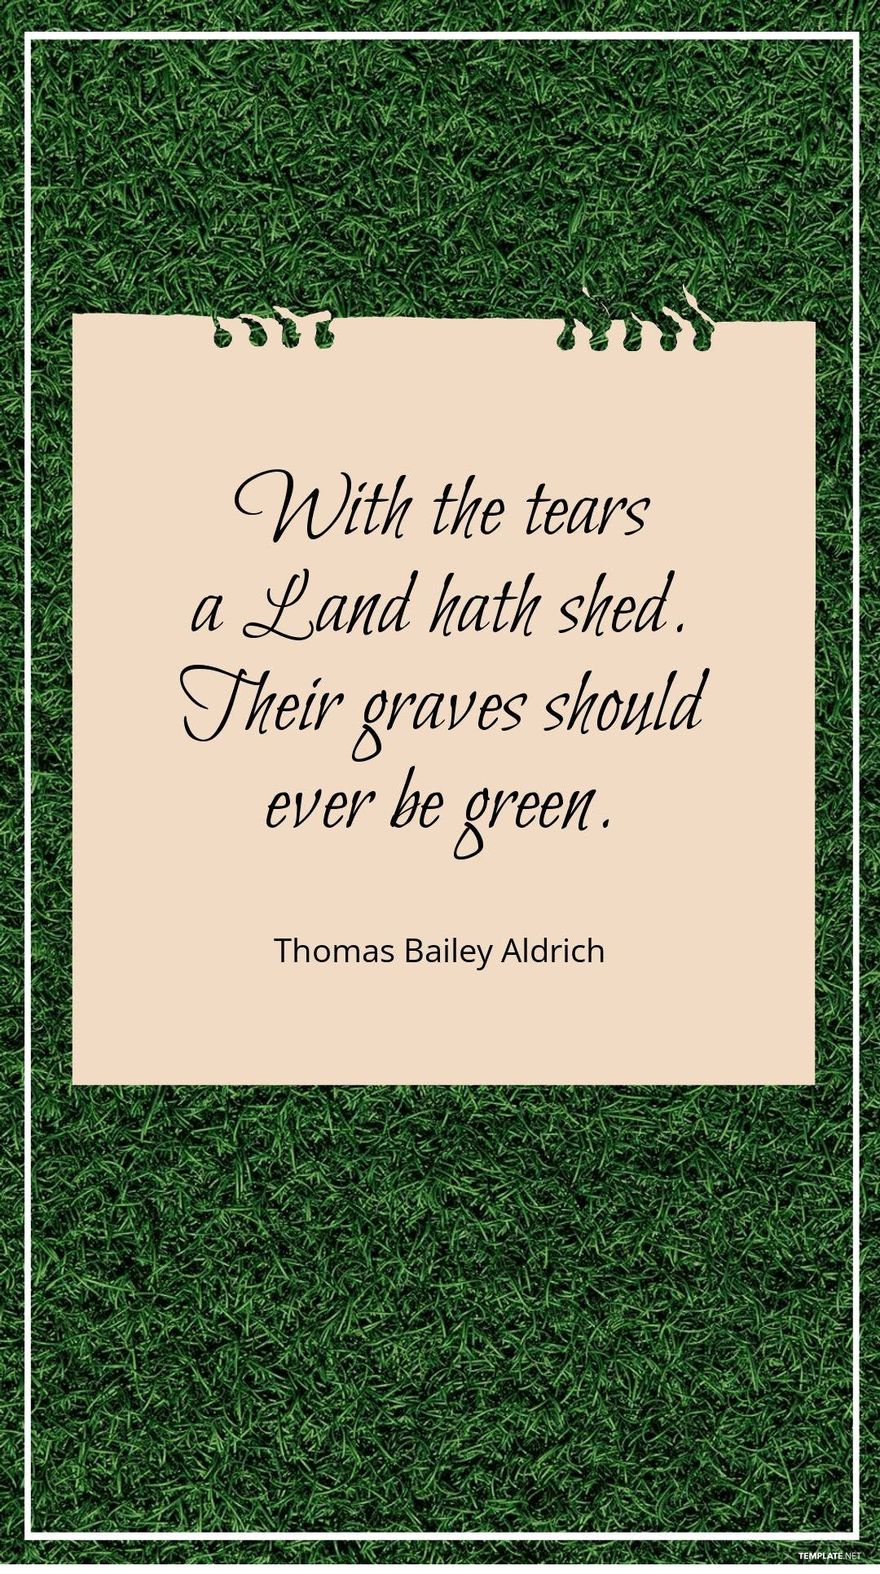 Thomas Bailey Aldrich - With the tears a Land hath shed. Their graves should ever be green.